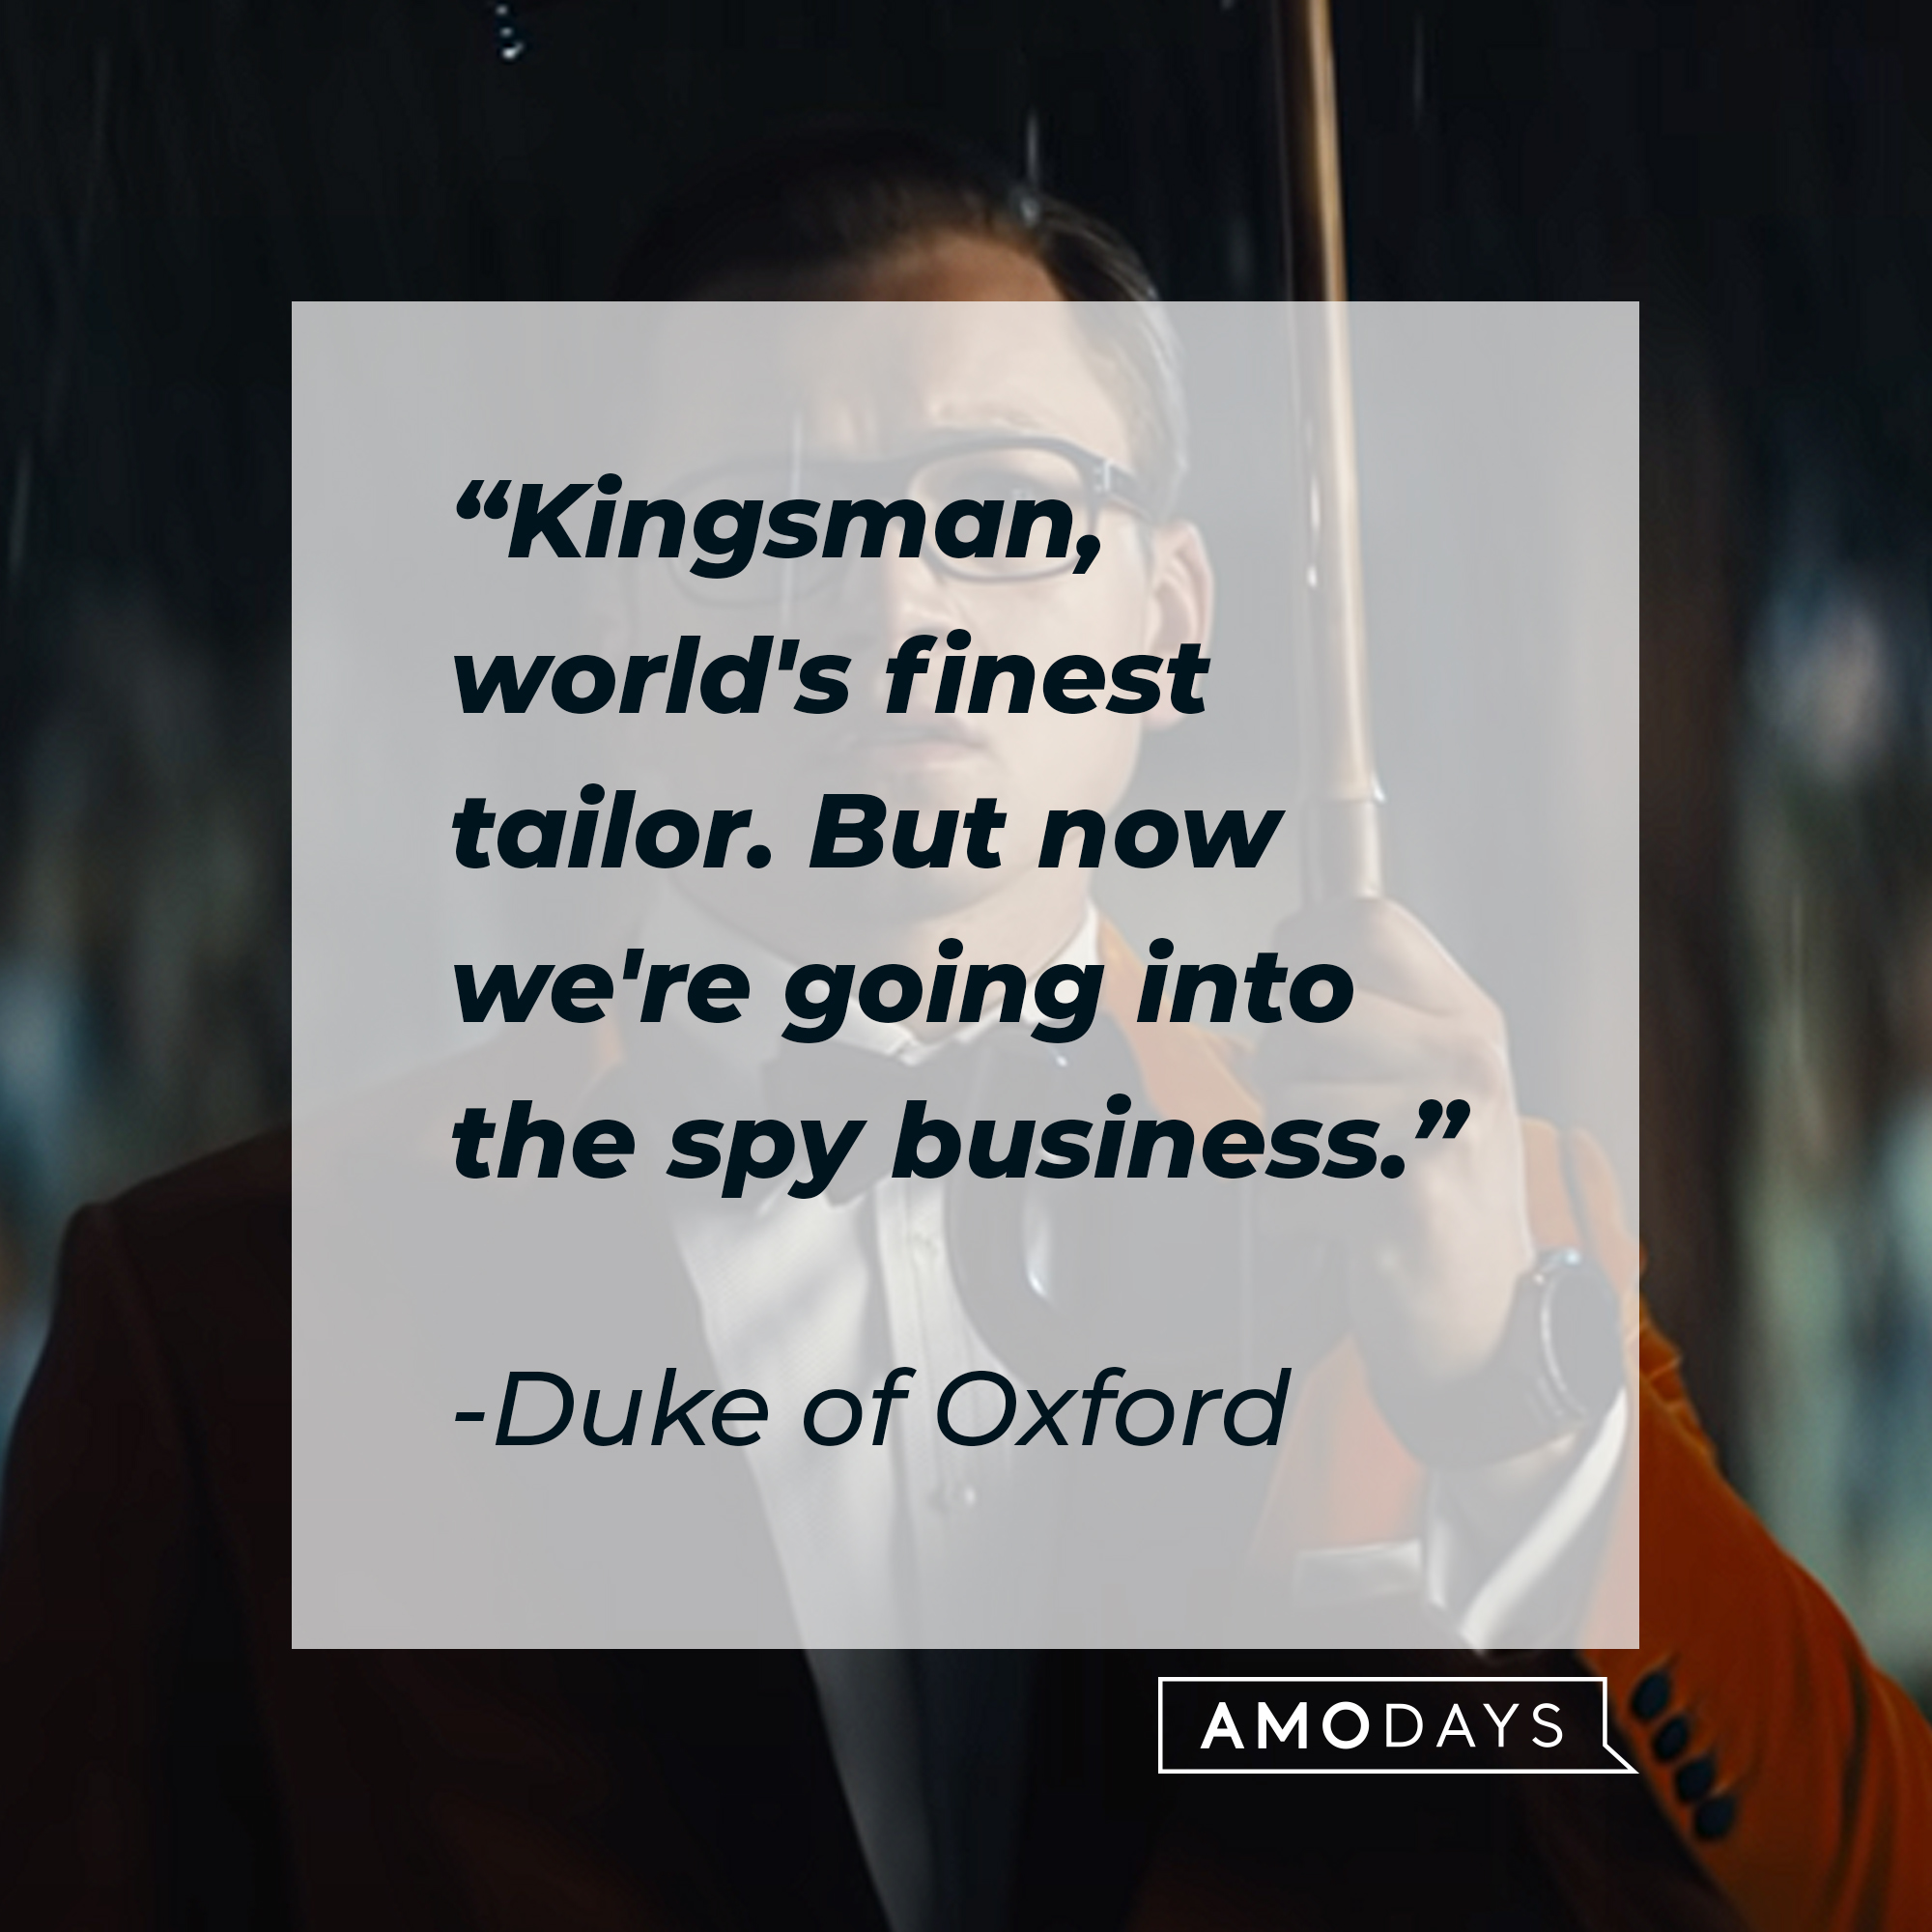 Duke of Oxford's quote: "Kingsman, world's finest tailor. But now we're going into the spy business." | Image: YouTube / 20thCenturyStudios